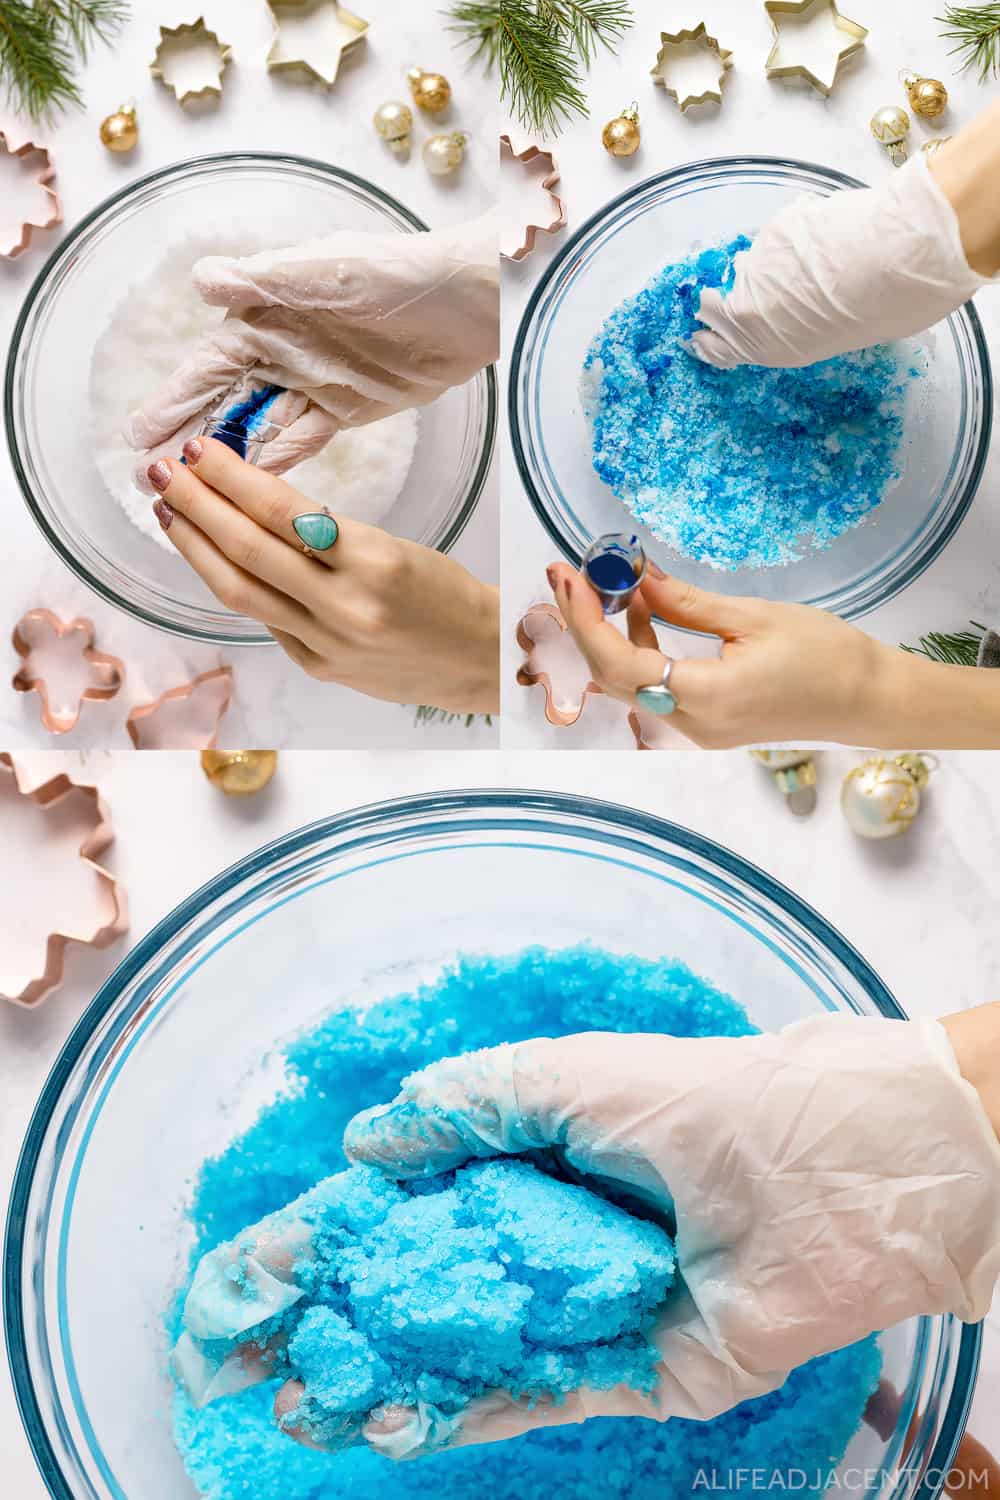 How to make shower bombs recipe – adding colorant to mixture.